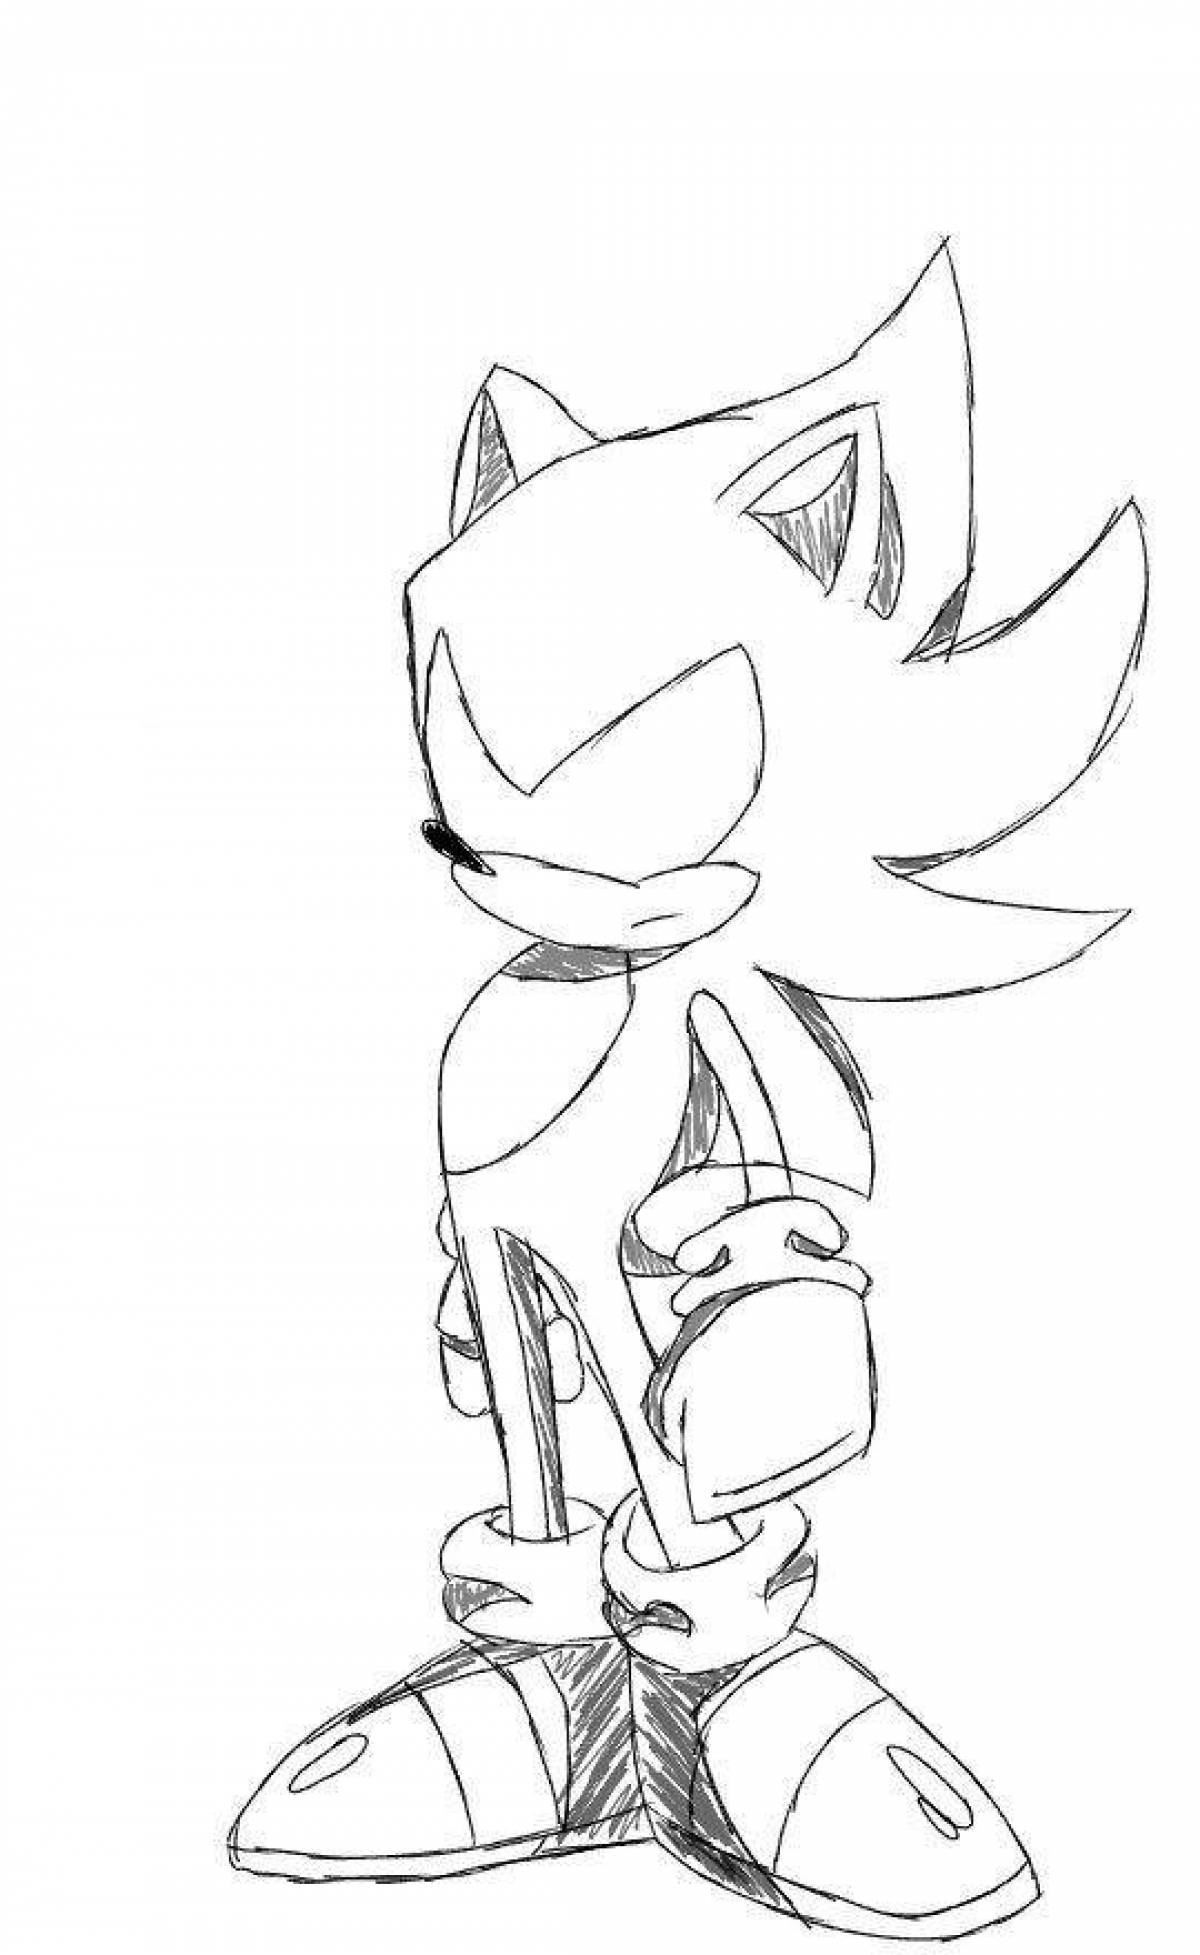 Dark Sonic coloring page